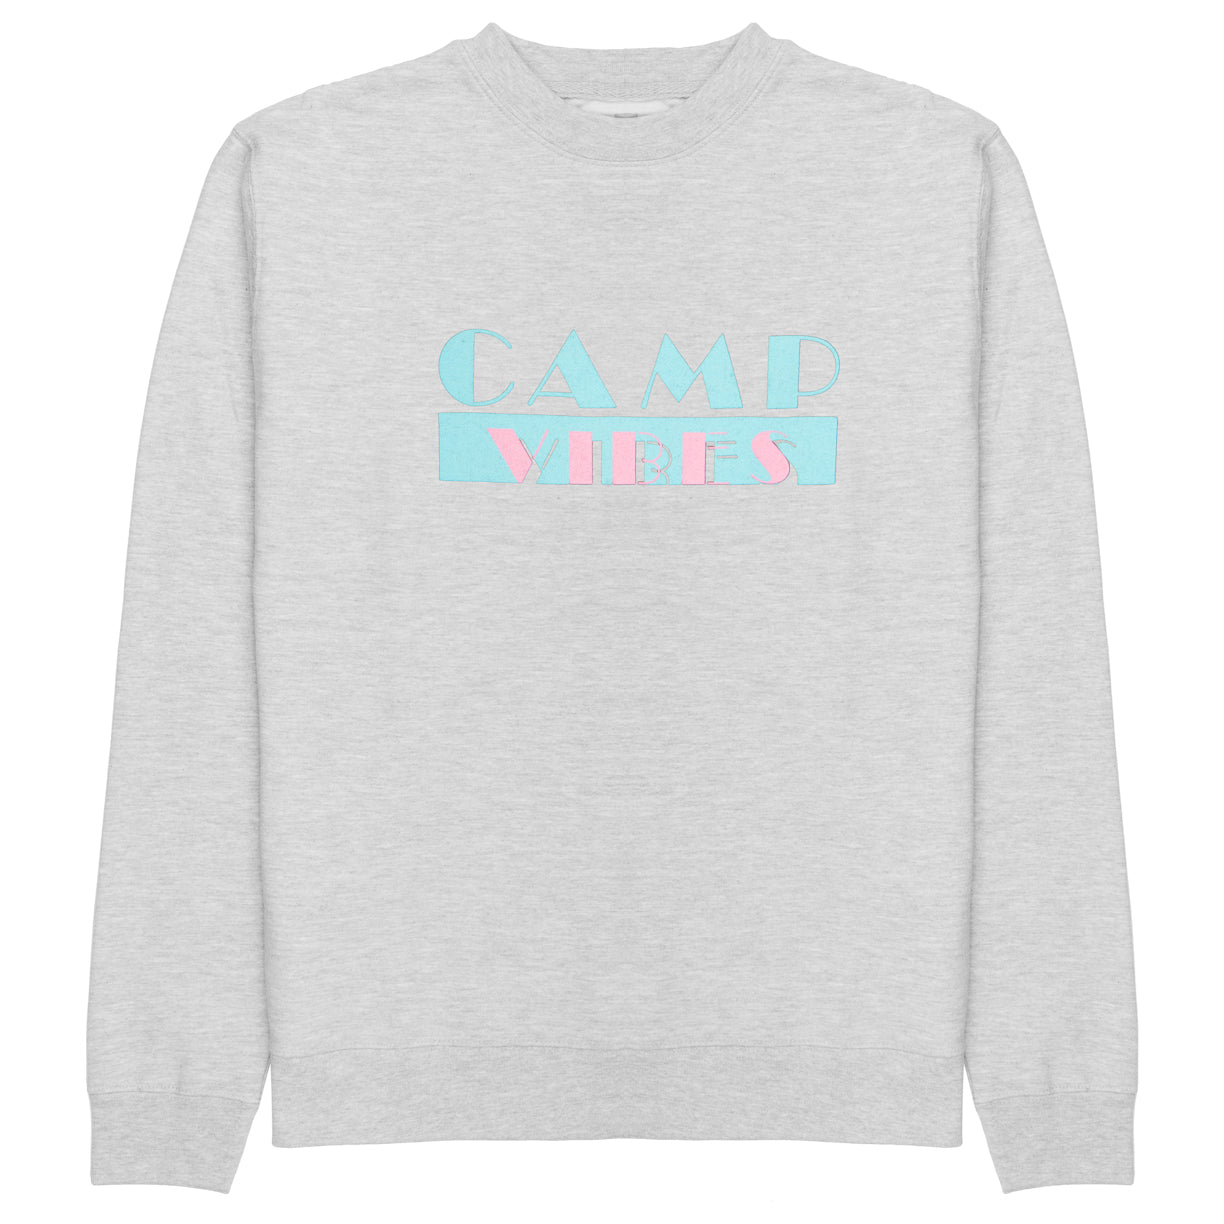 Vices Crew product Gray Heather S 